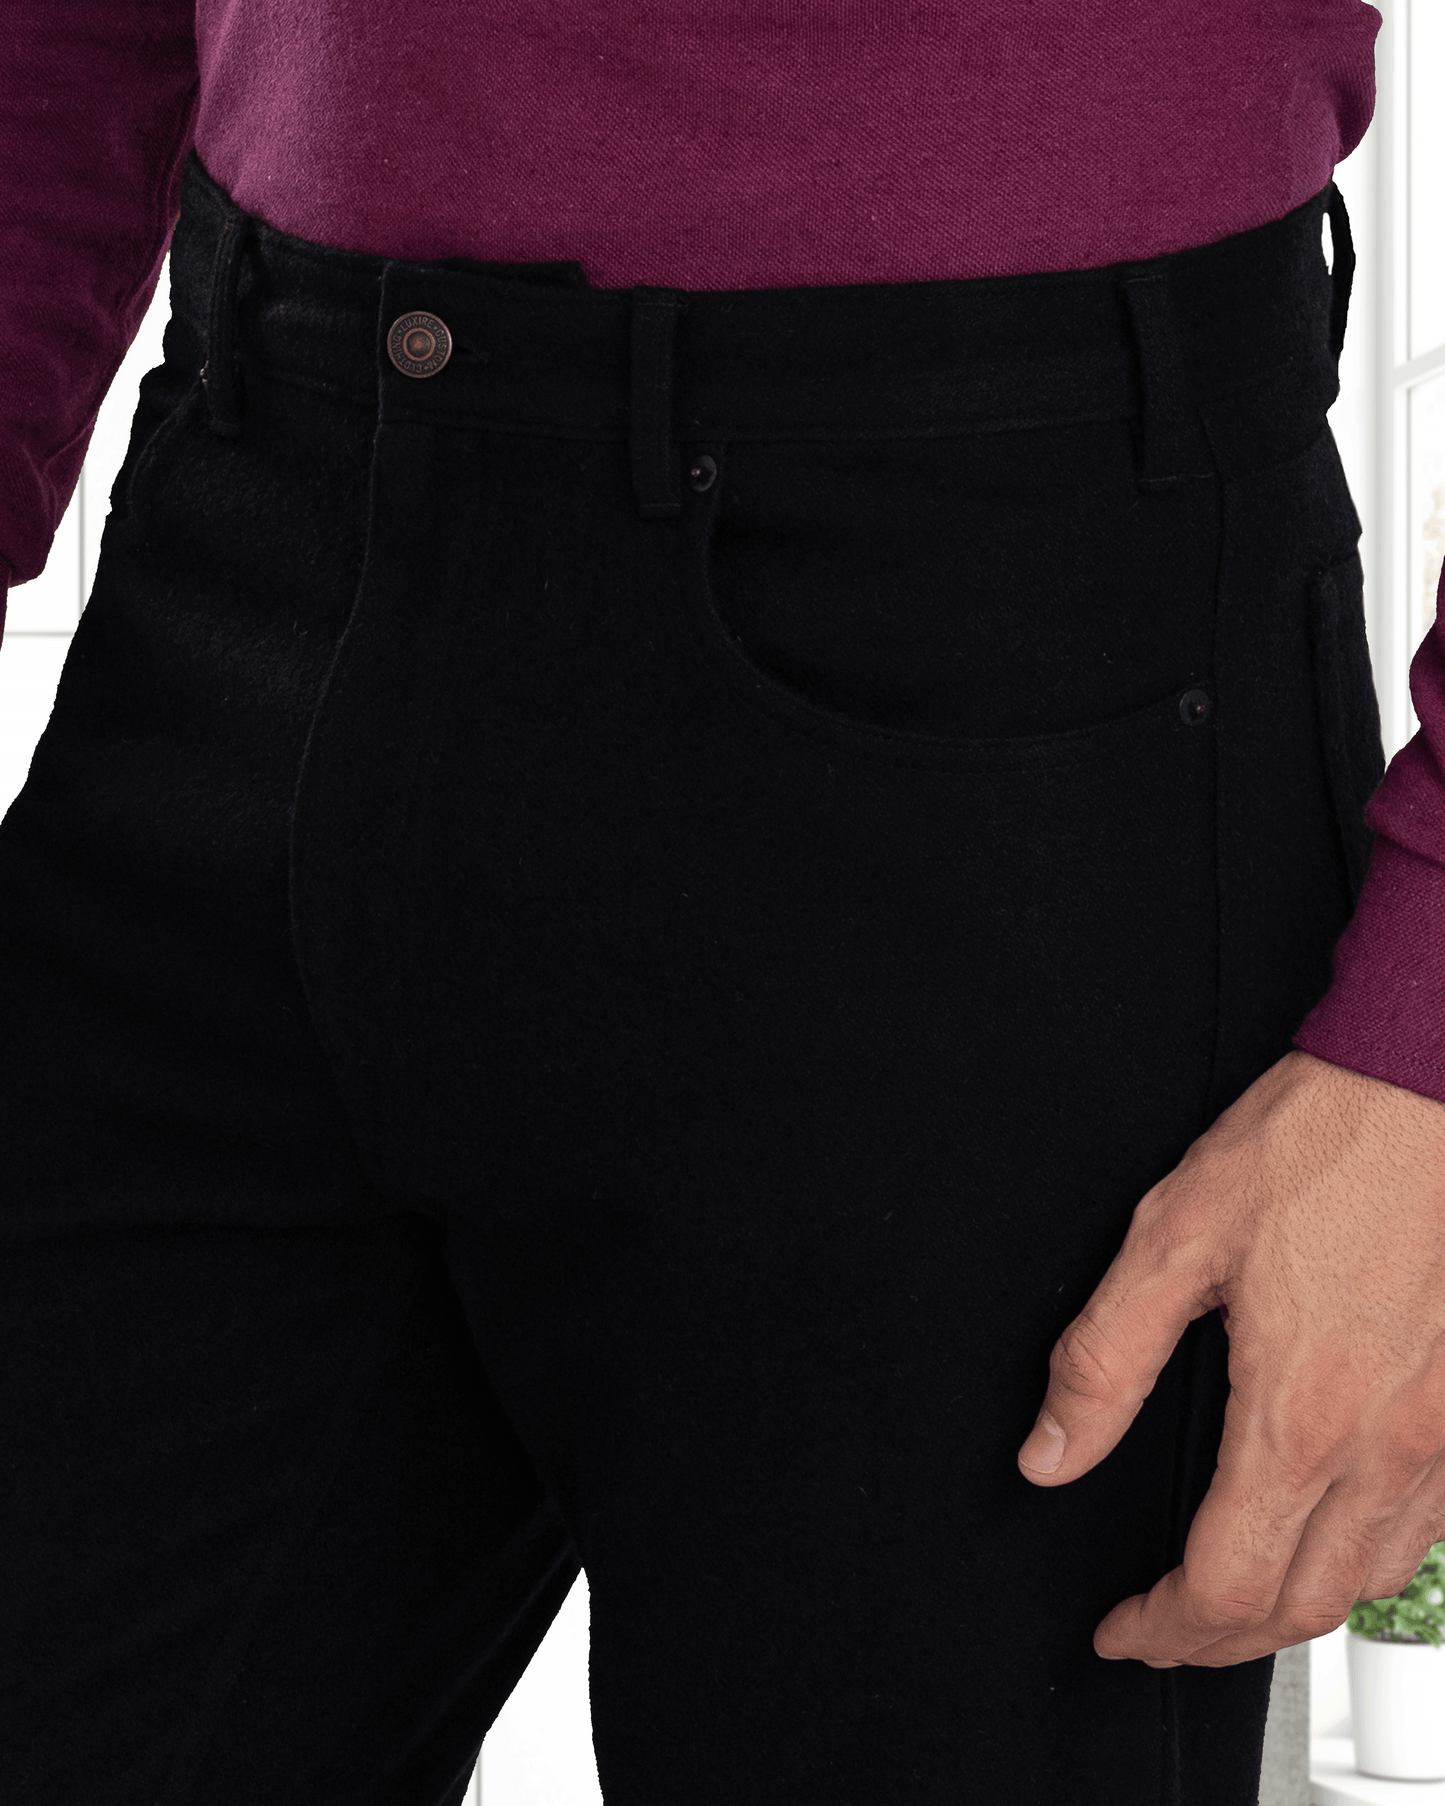 Model close up wearing mens wool jeans by Luxire in black